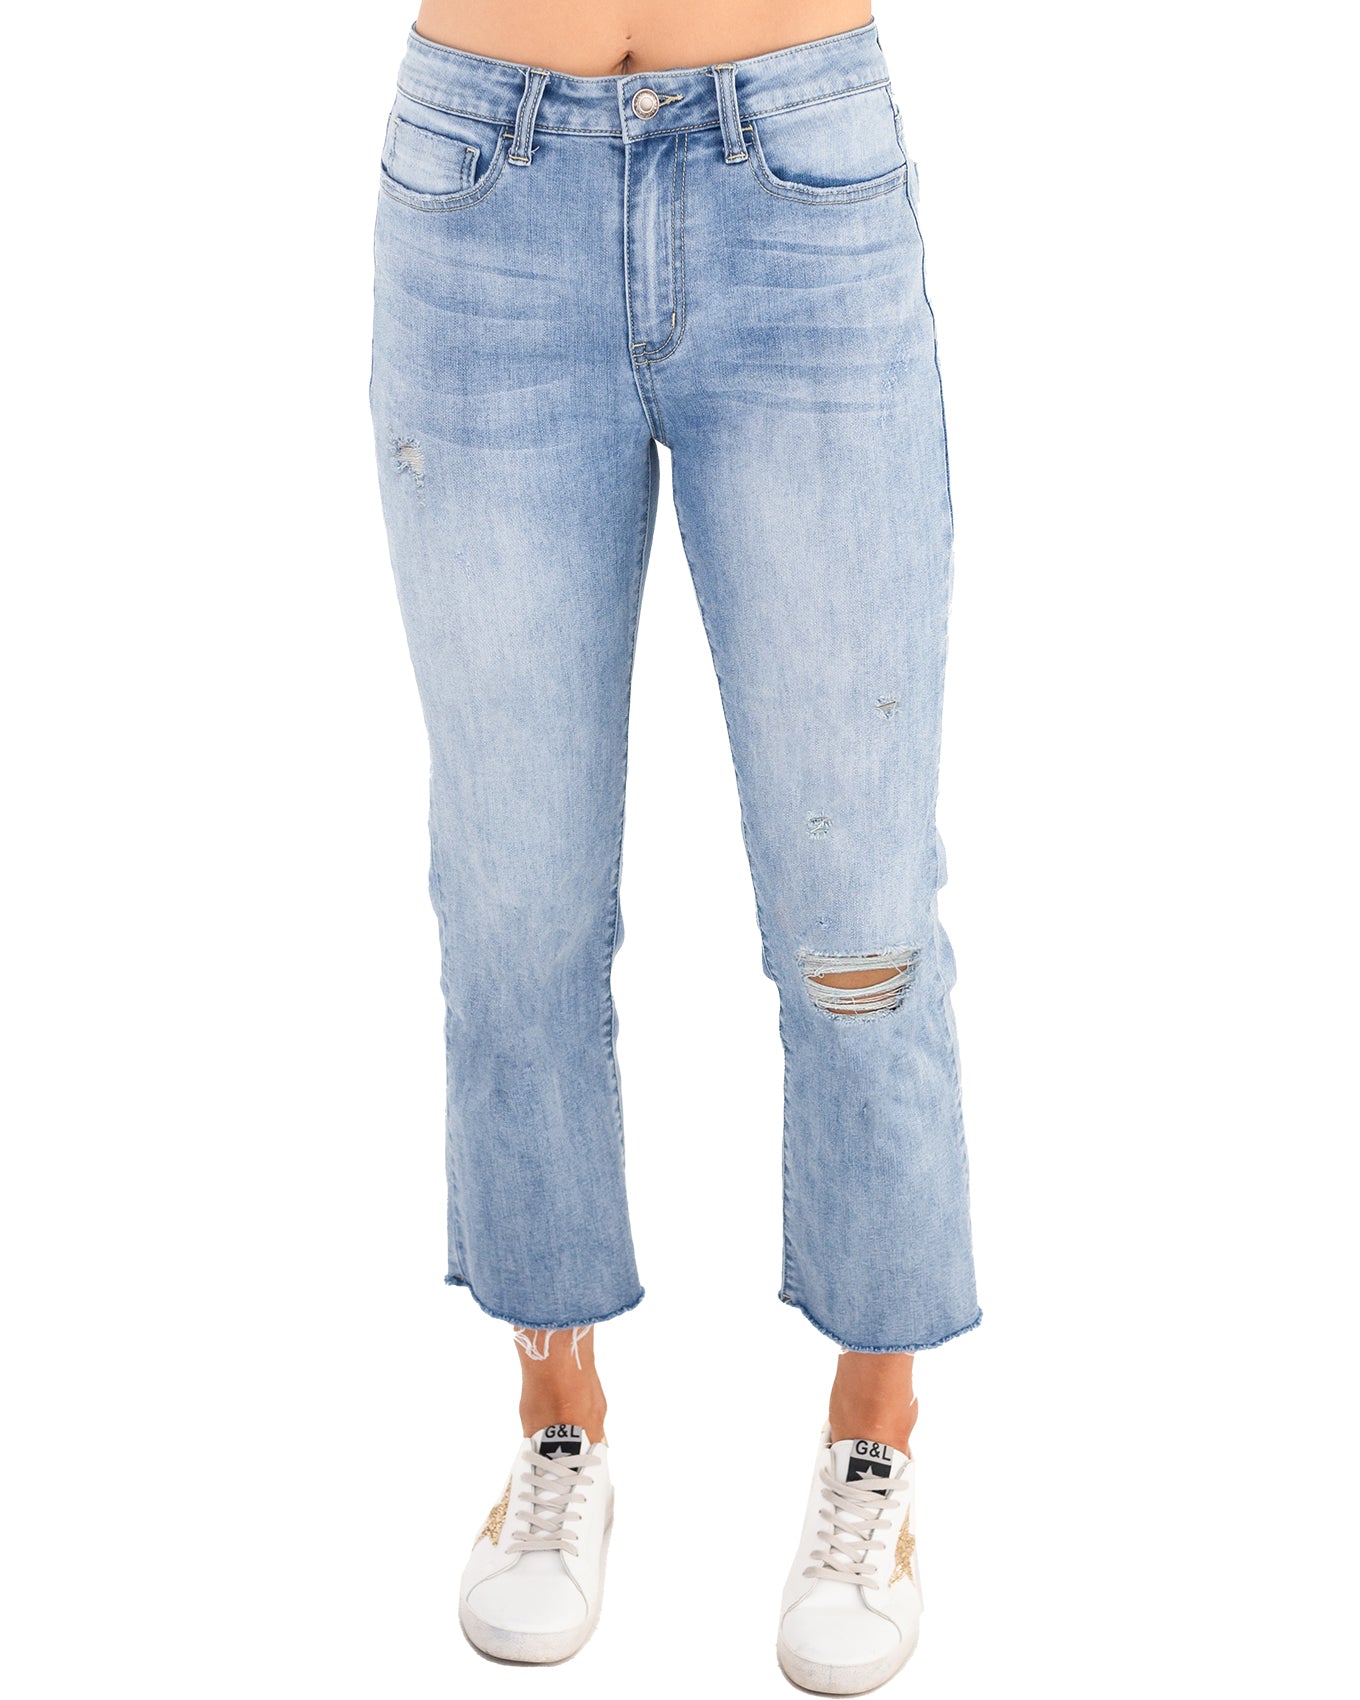 Front stock shot of Light-Mid Wash Mel’s Fave Distressed Cropped Straight Leg Denim